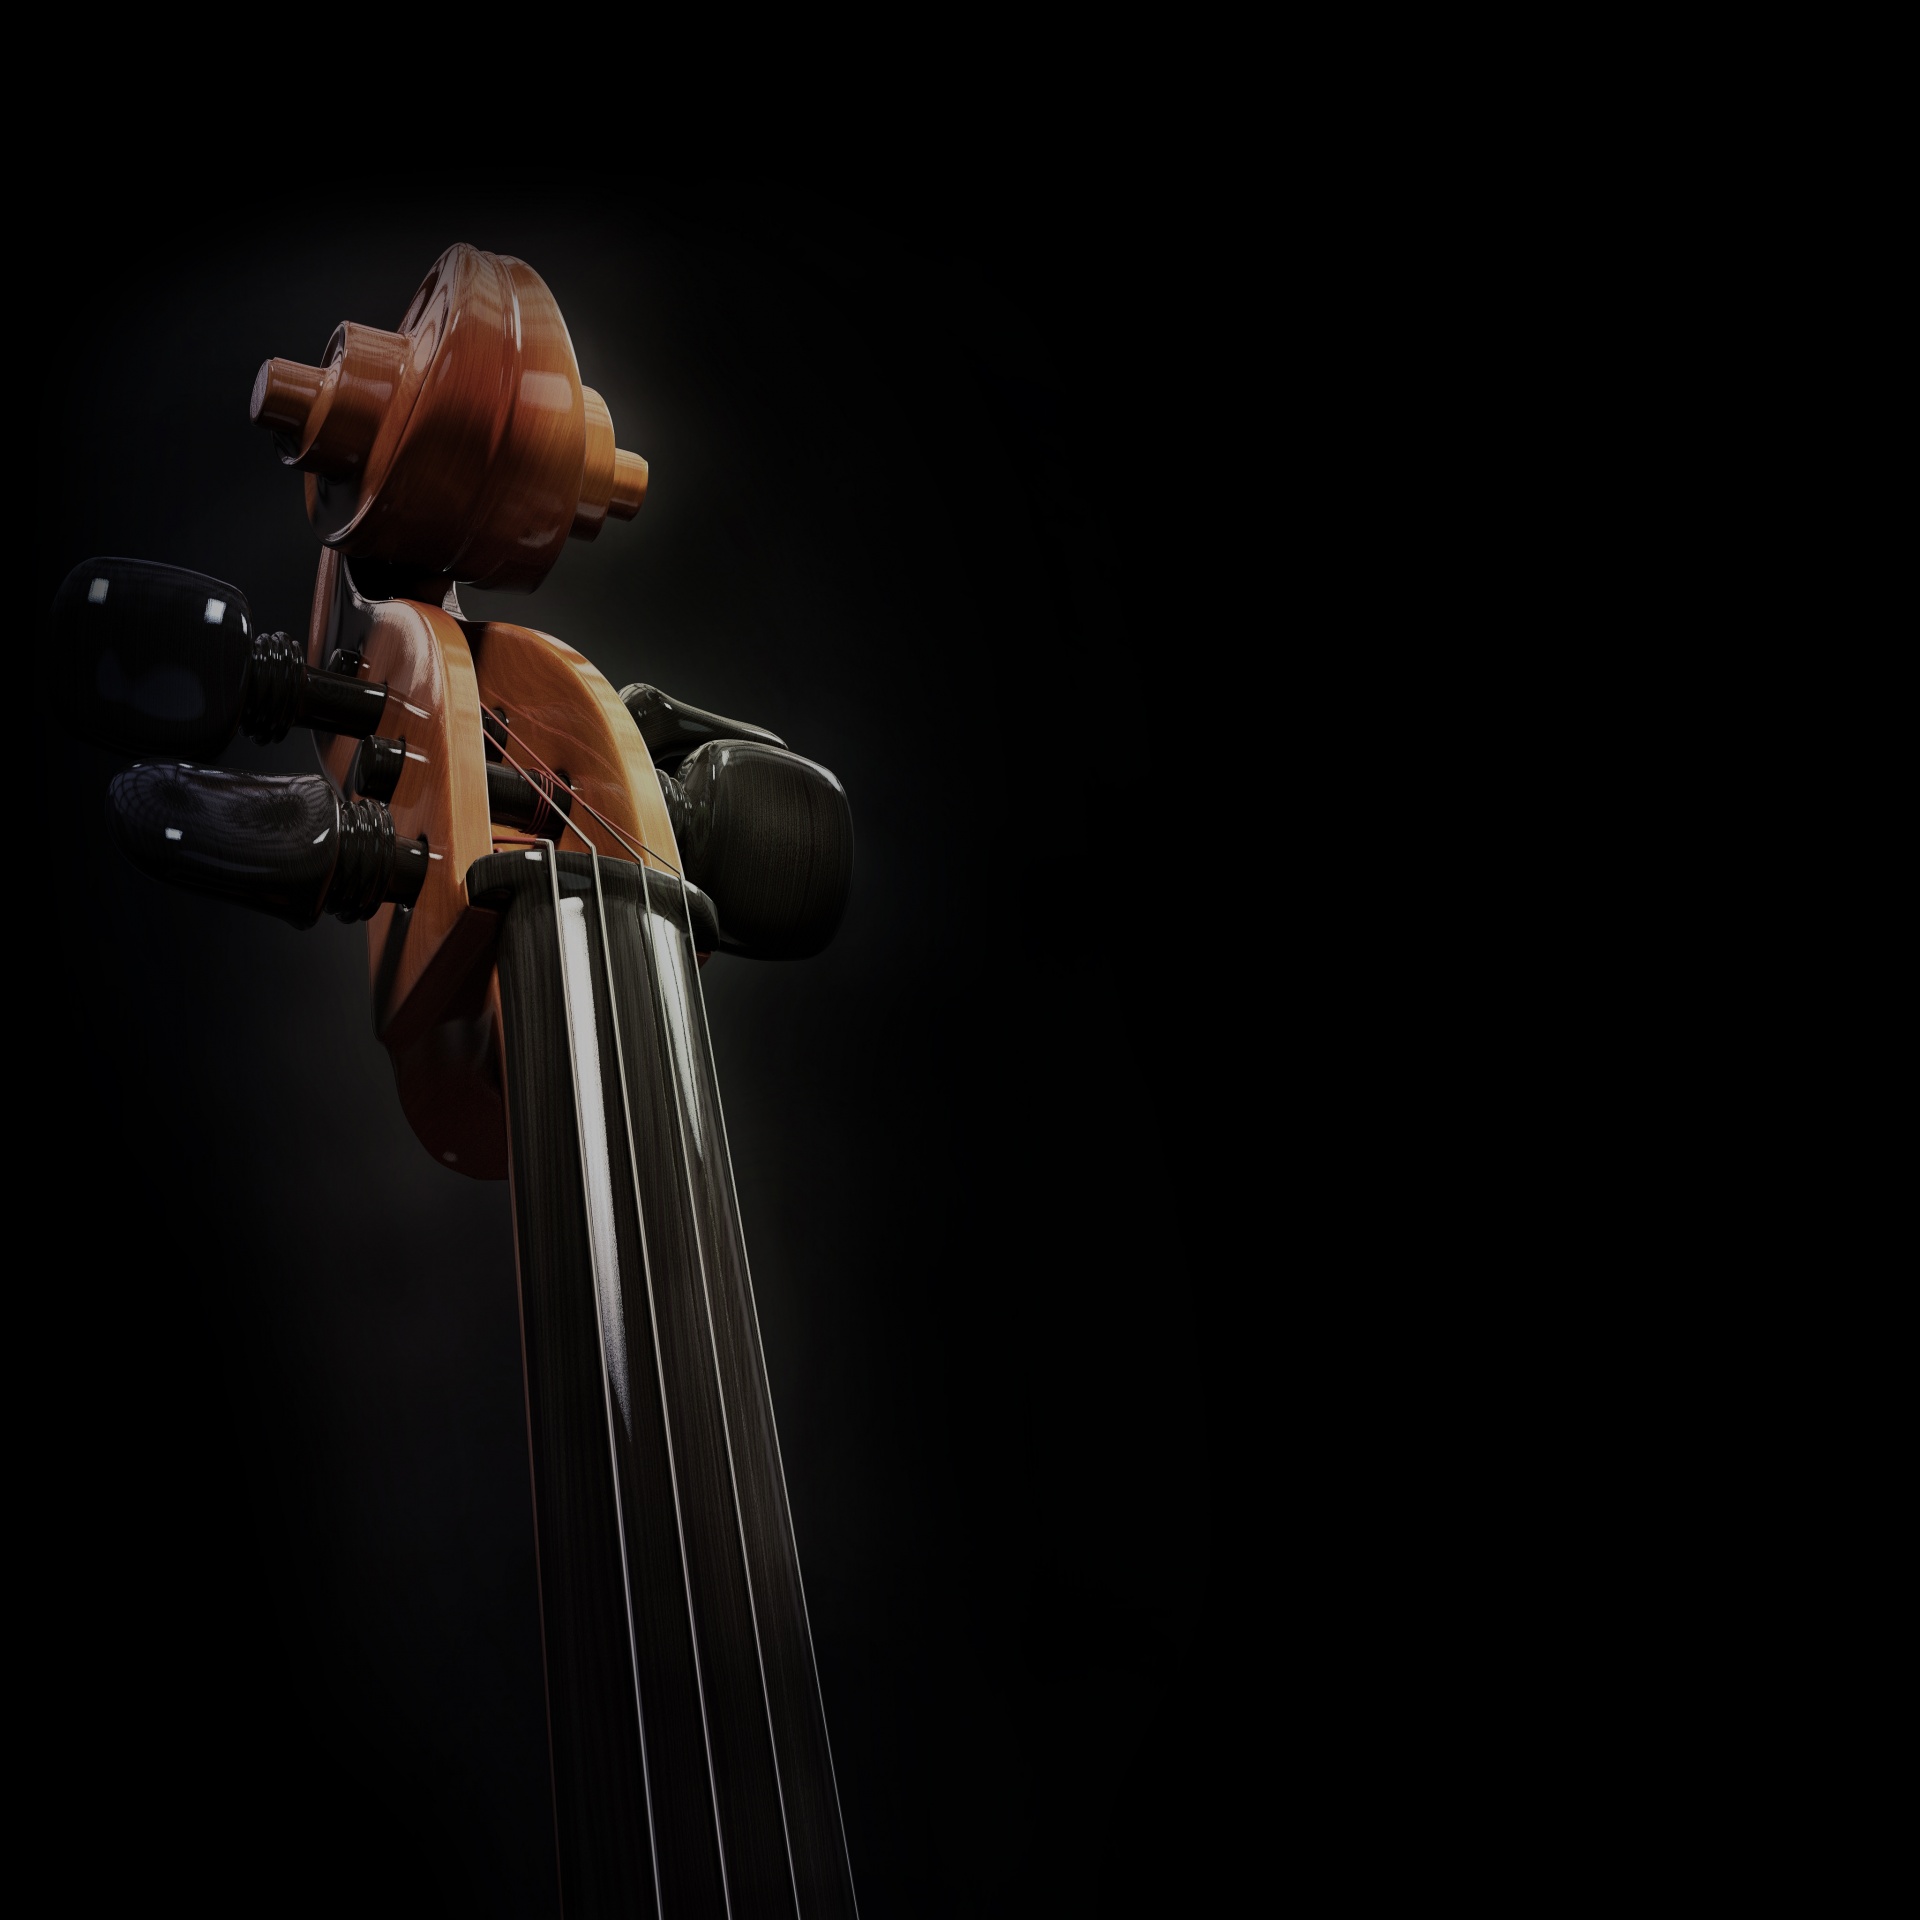 Cello in front of black background